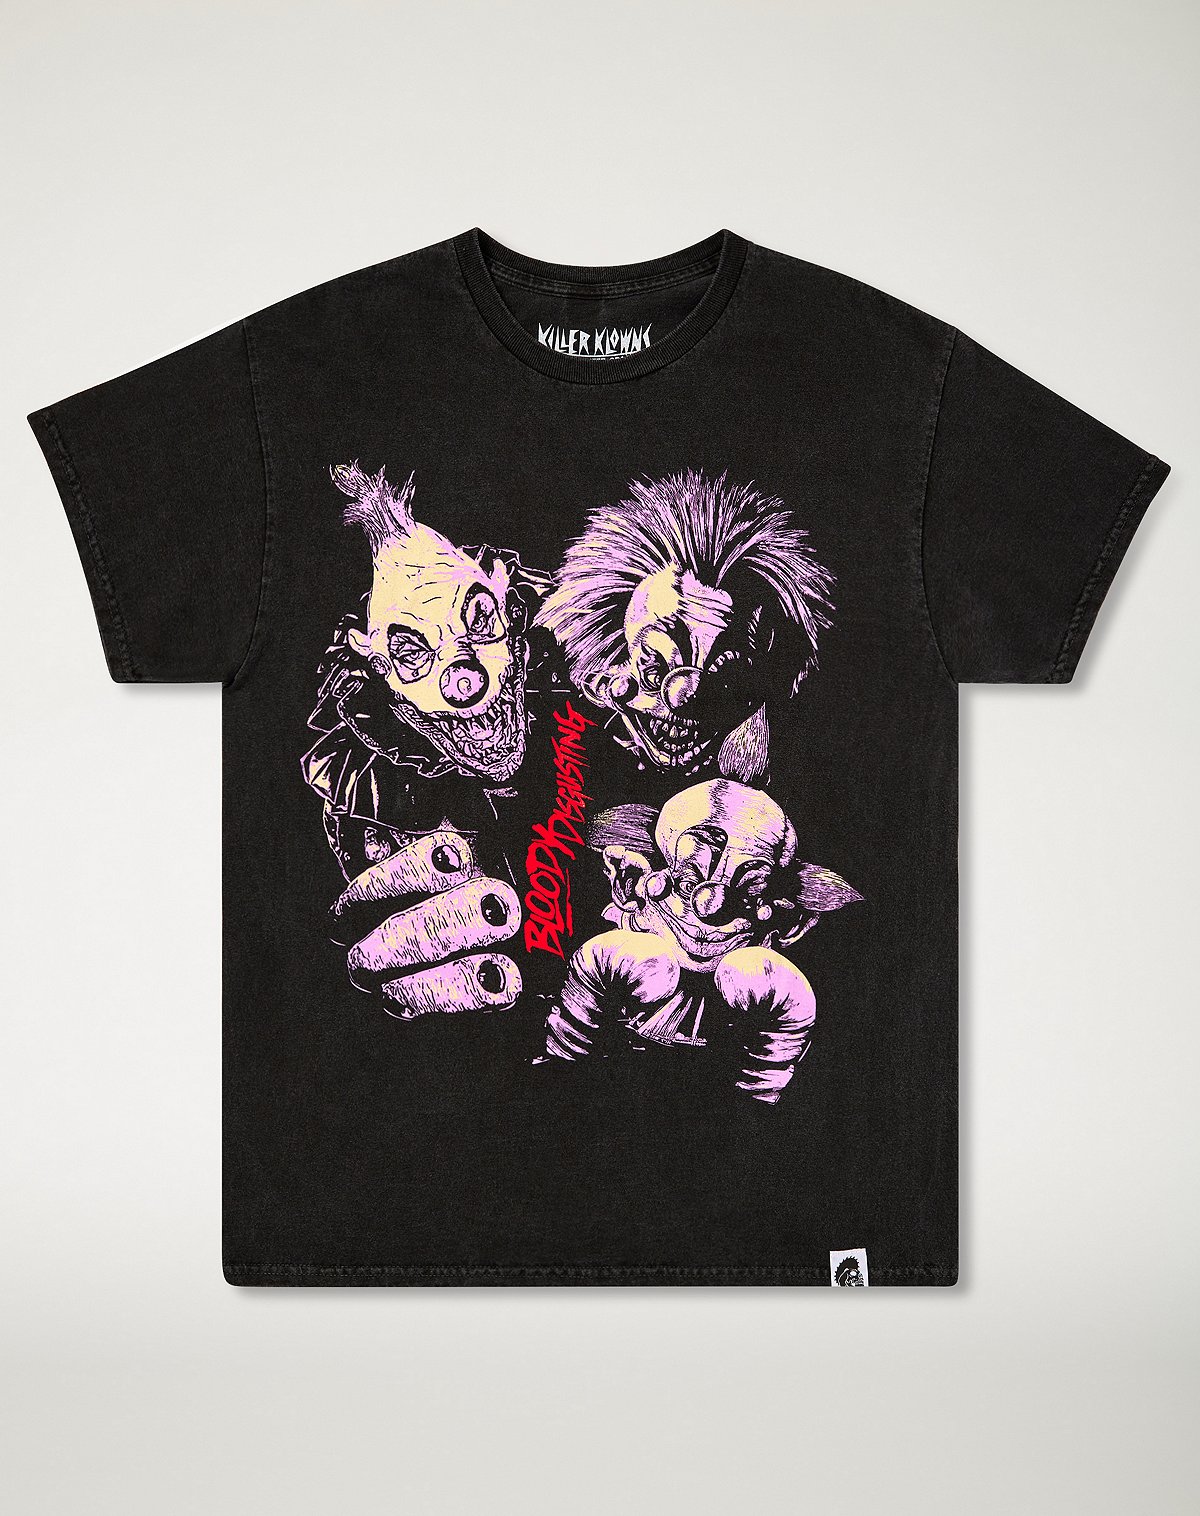 Killer Klowns from Outer Space x Bloody Disgusting T Shirt